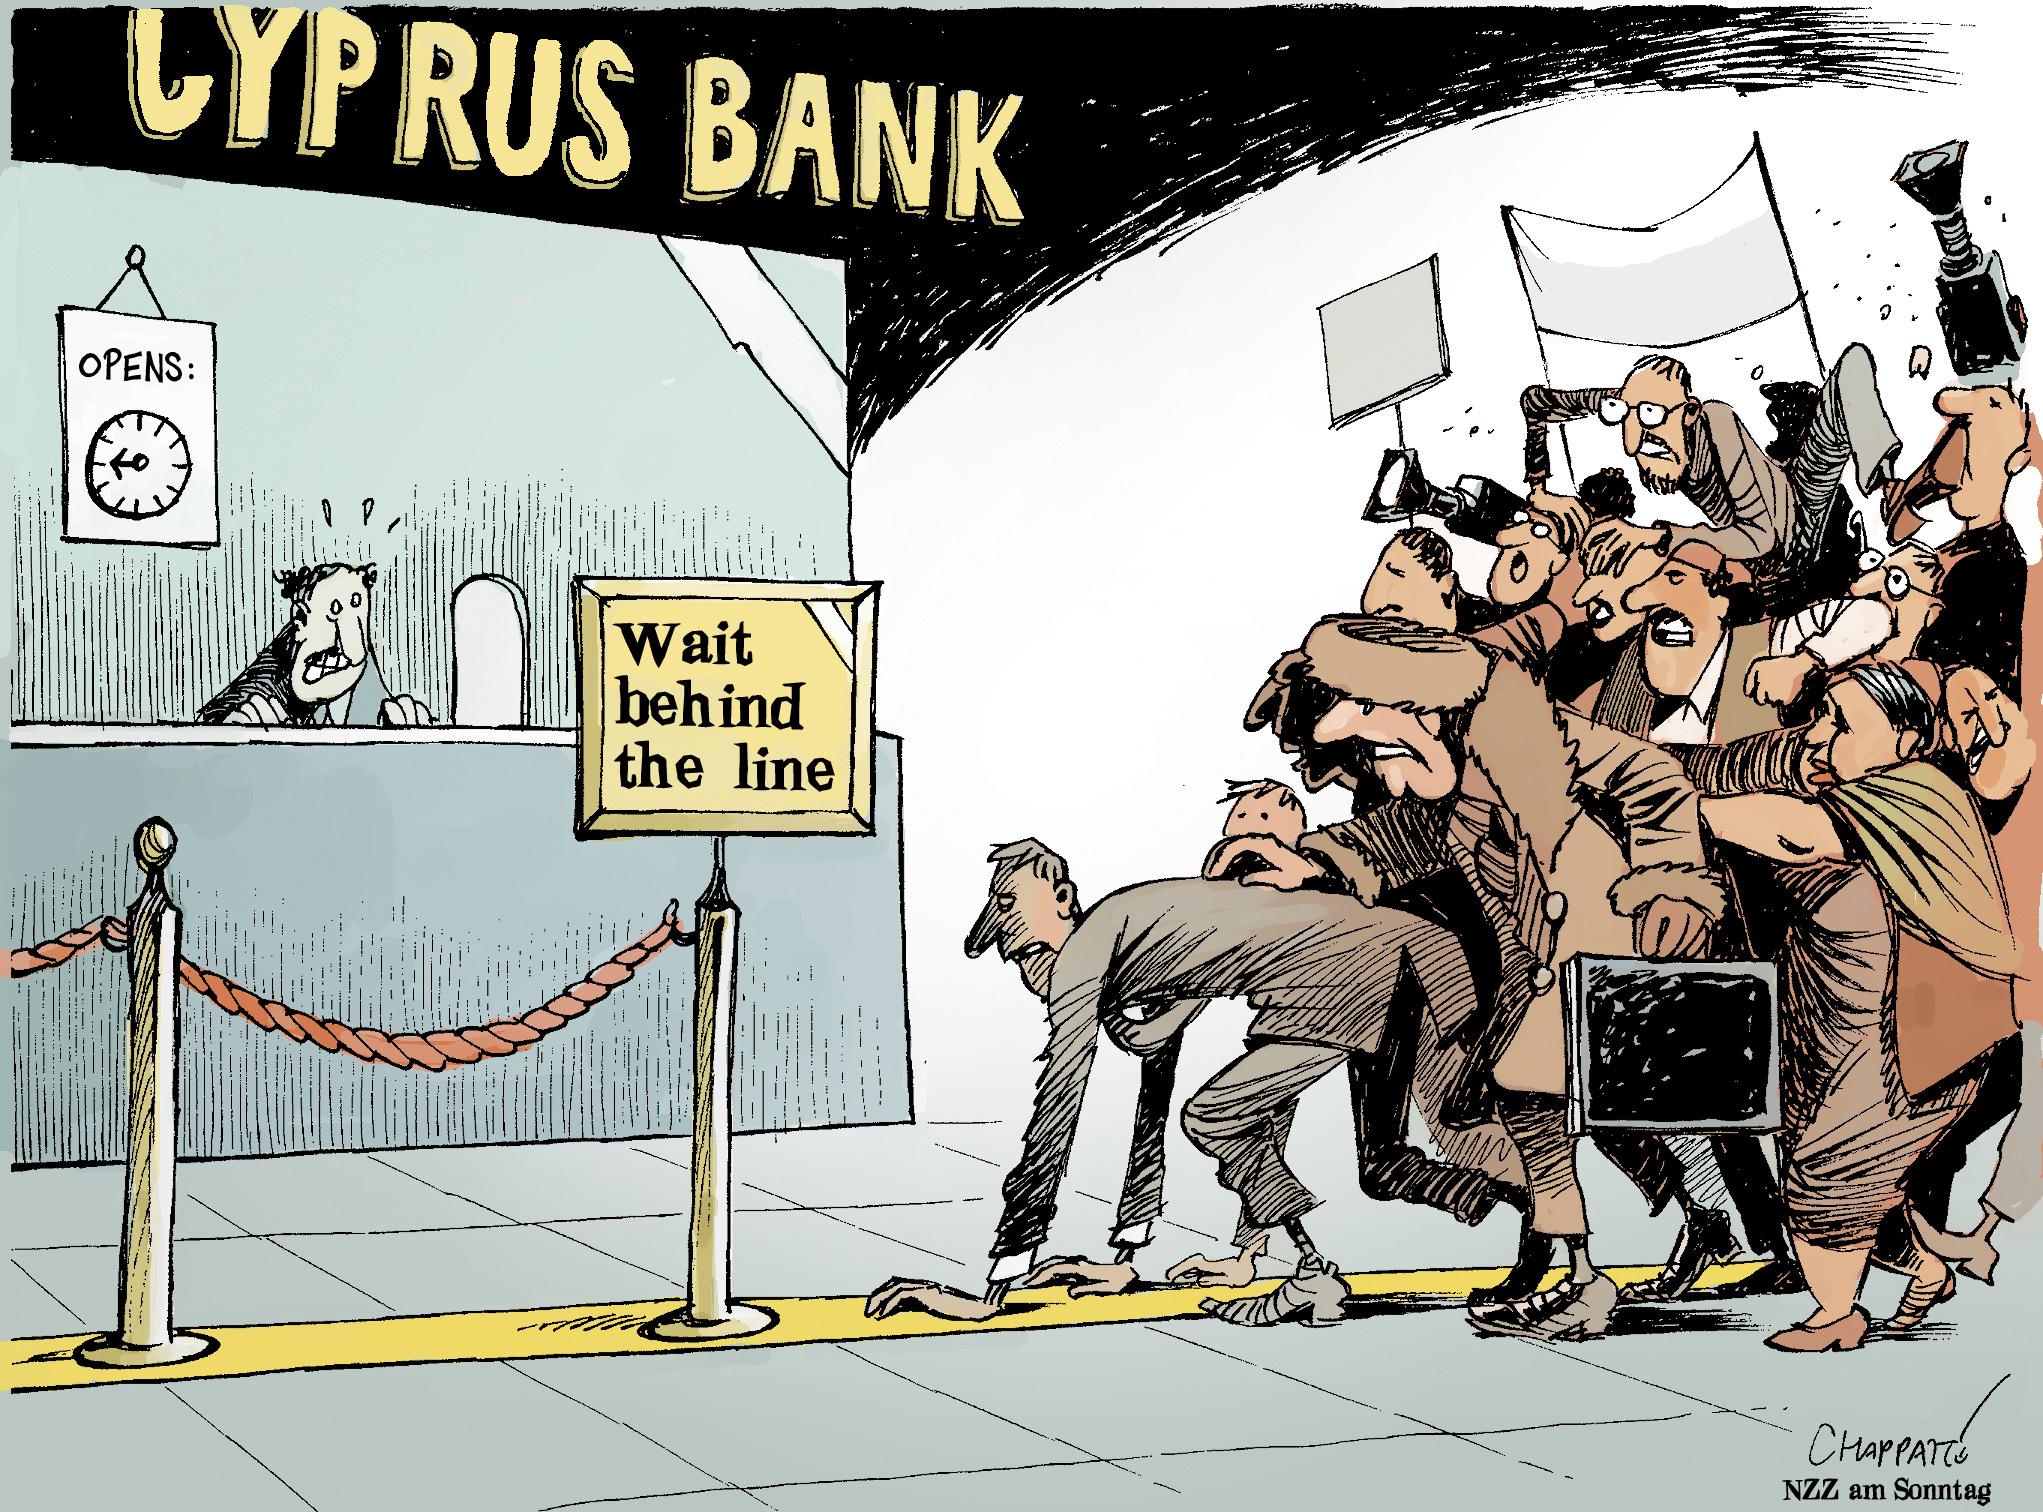 Waiting for Cyprus banks to reopen